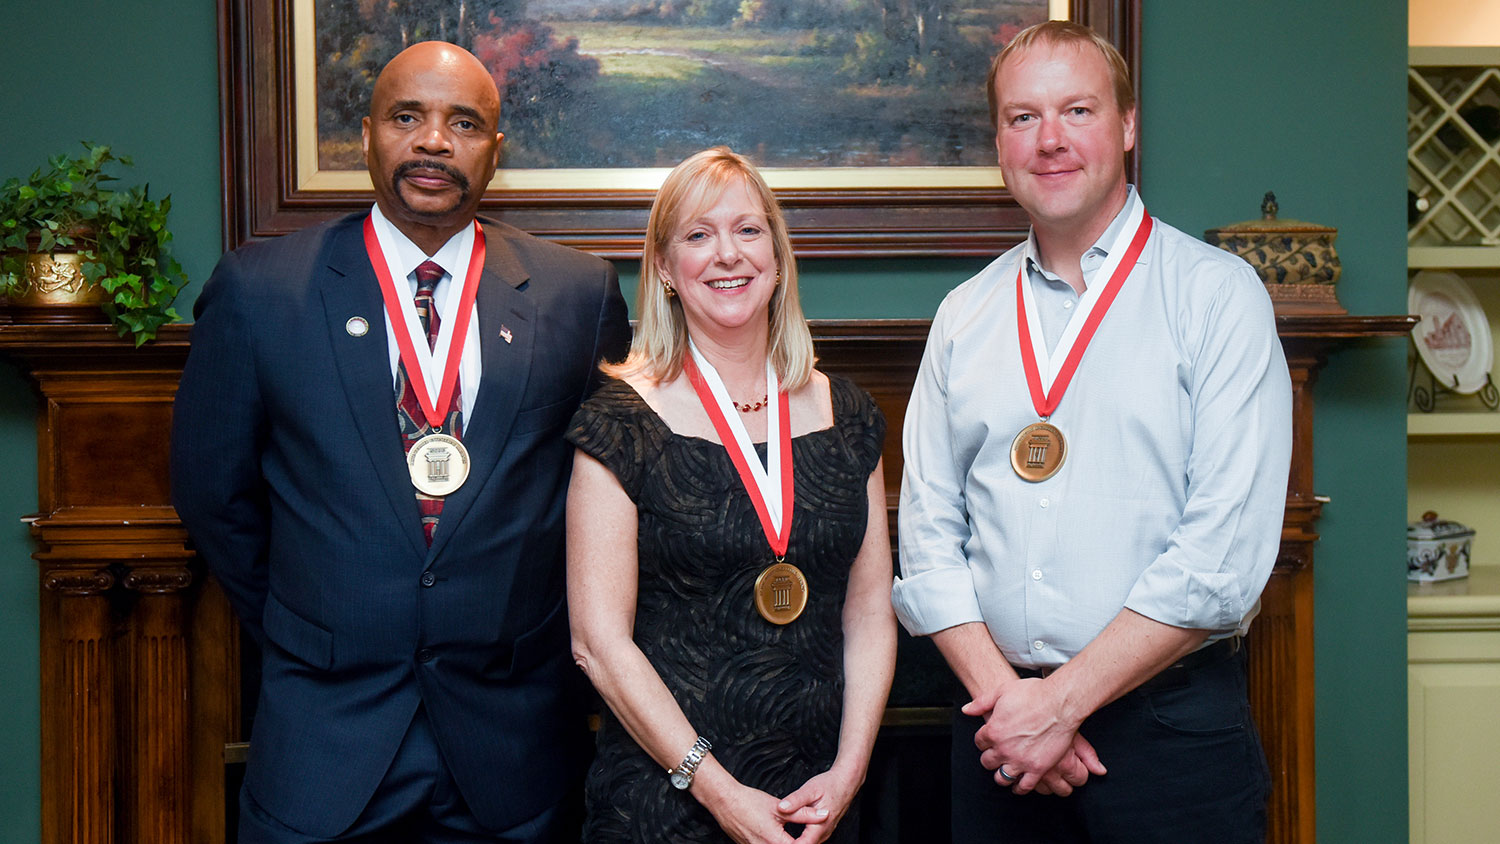 The 2016 recipients of the Distinguished Engineering Alumnus award are shown from left: Brig. Gen. (Retired) Leodis Jennings, Pamela Townsend and Dr. Jason Rhode.